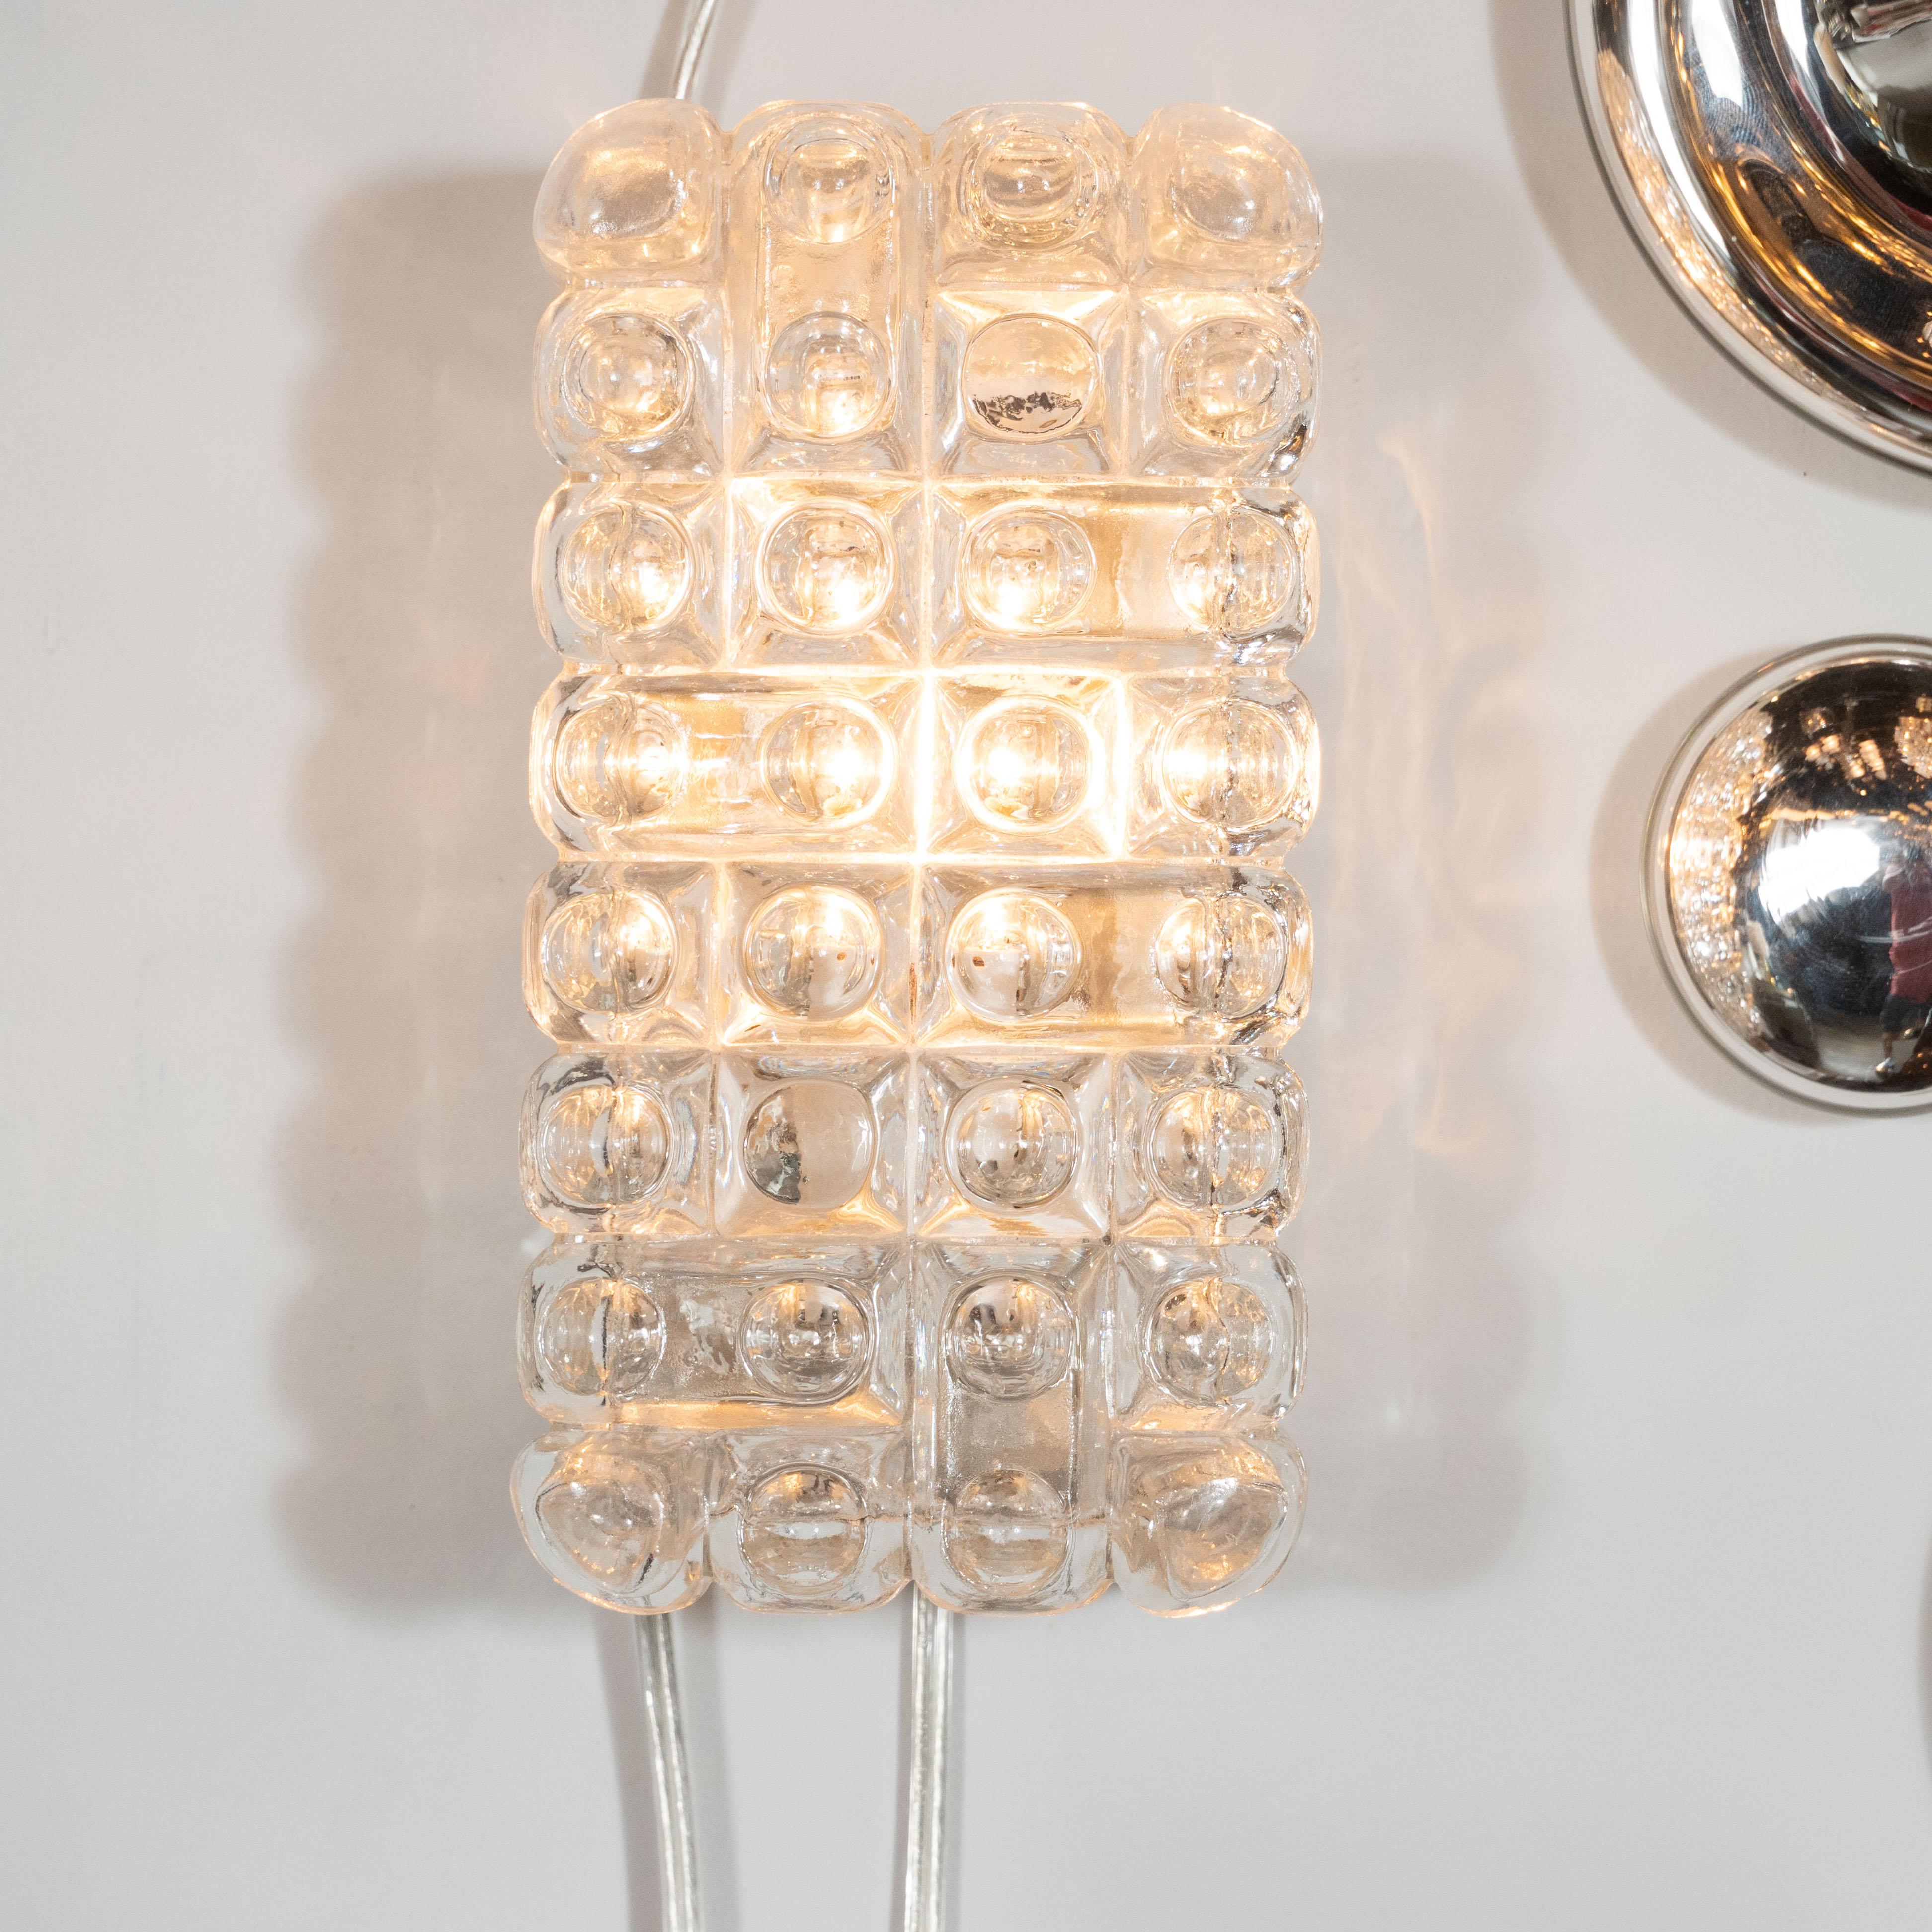 This understated and elegant pair of sconces were realized by the esteemed maker Erco in Germany, circa 1970. They feature rectangular bodies with rounded corners and a lattice pattern formed by intersecting channels etched into the glass. Circular